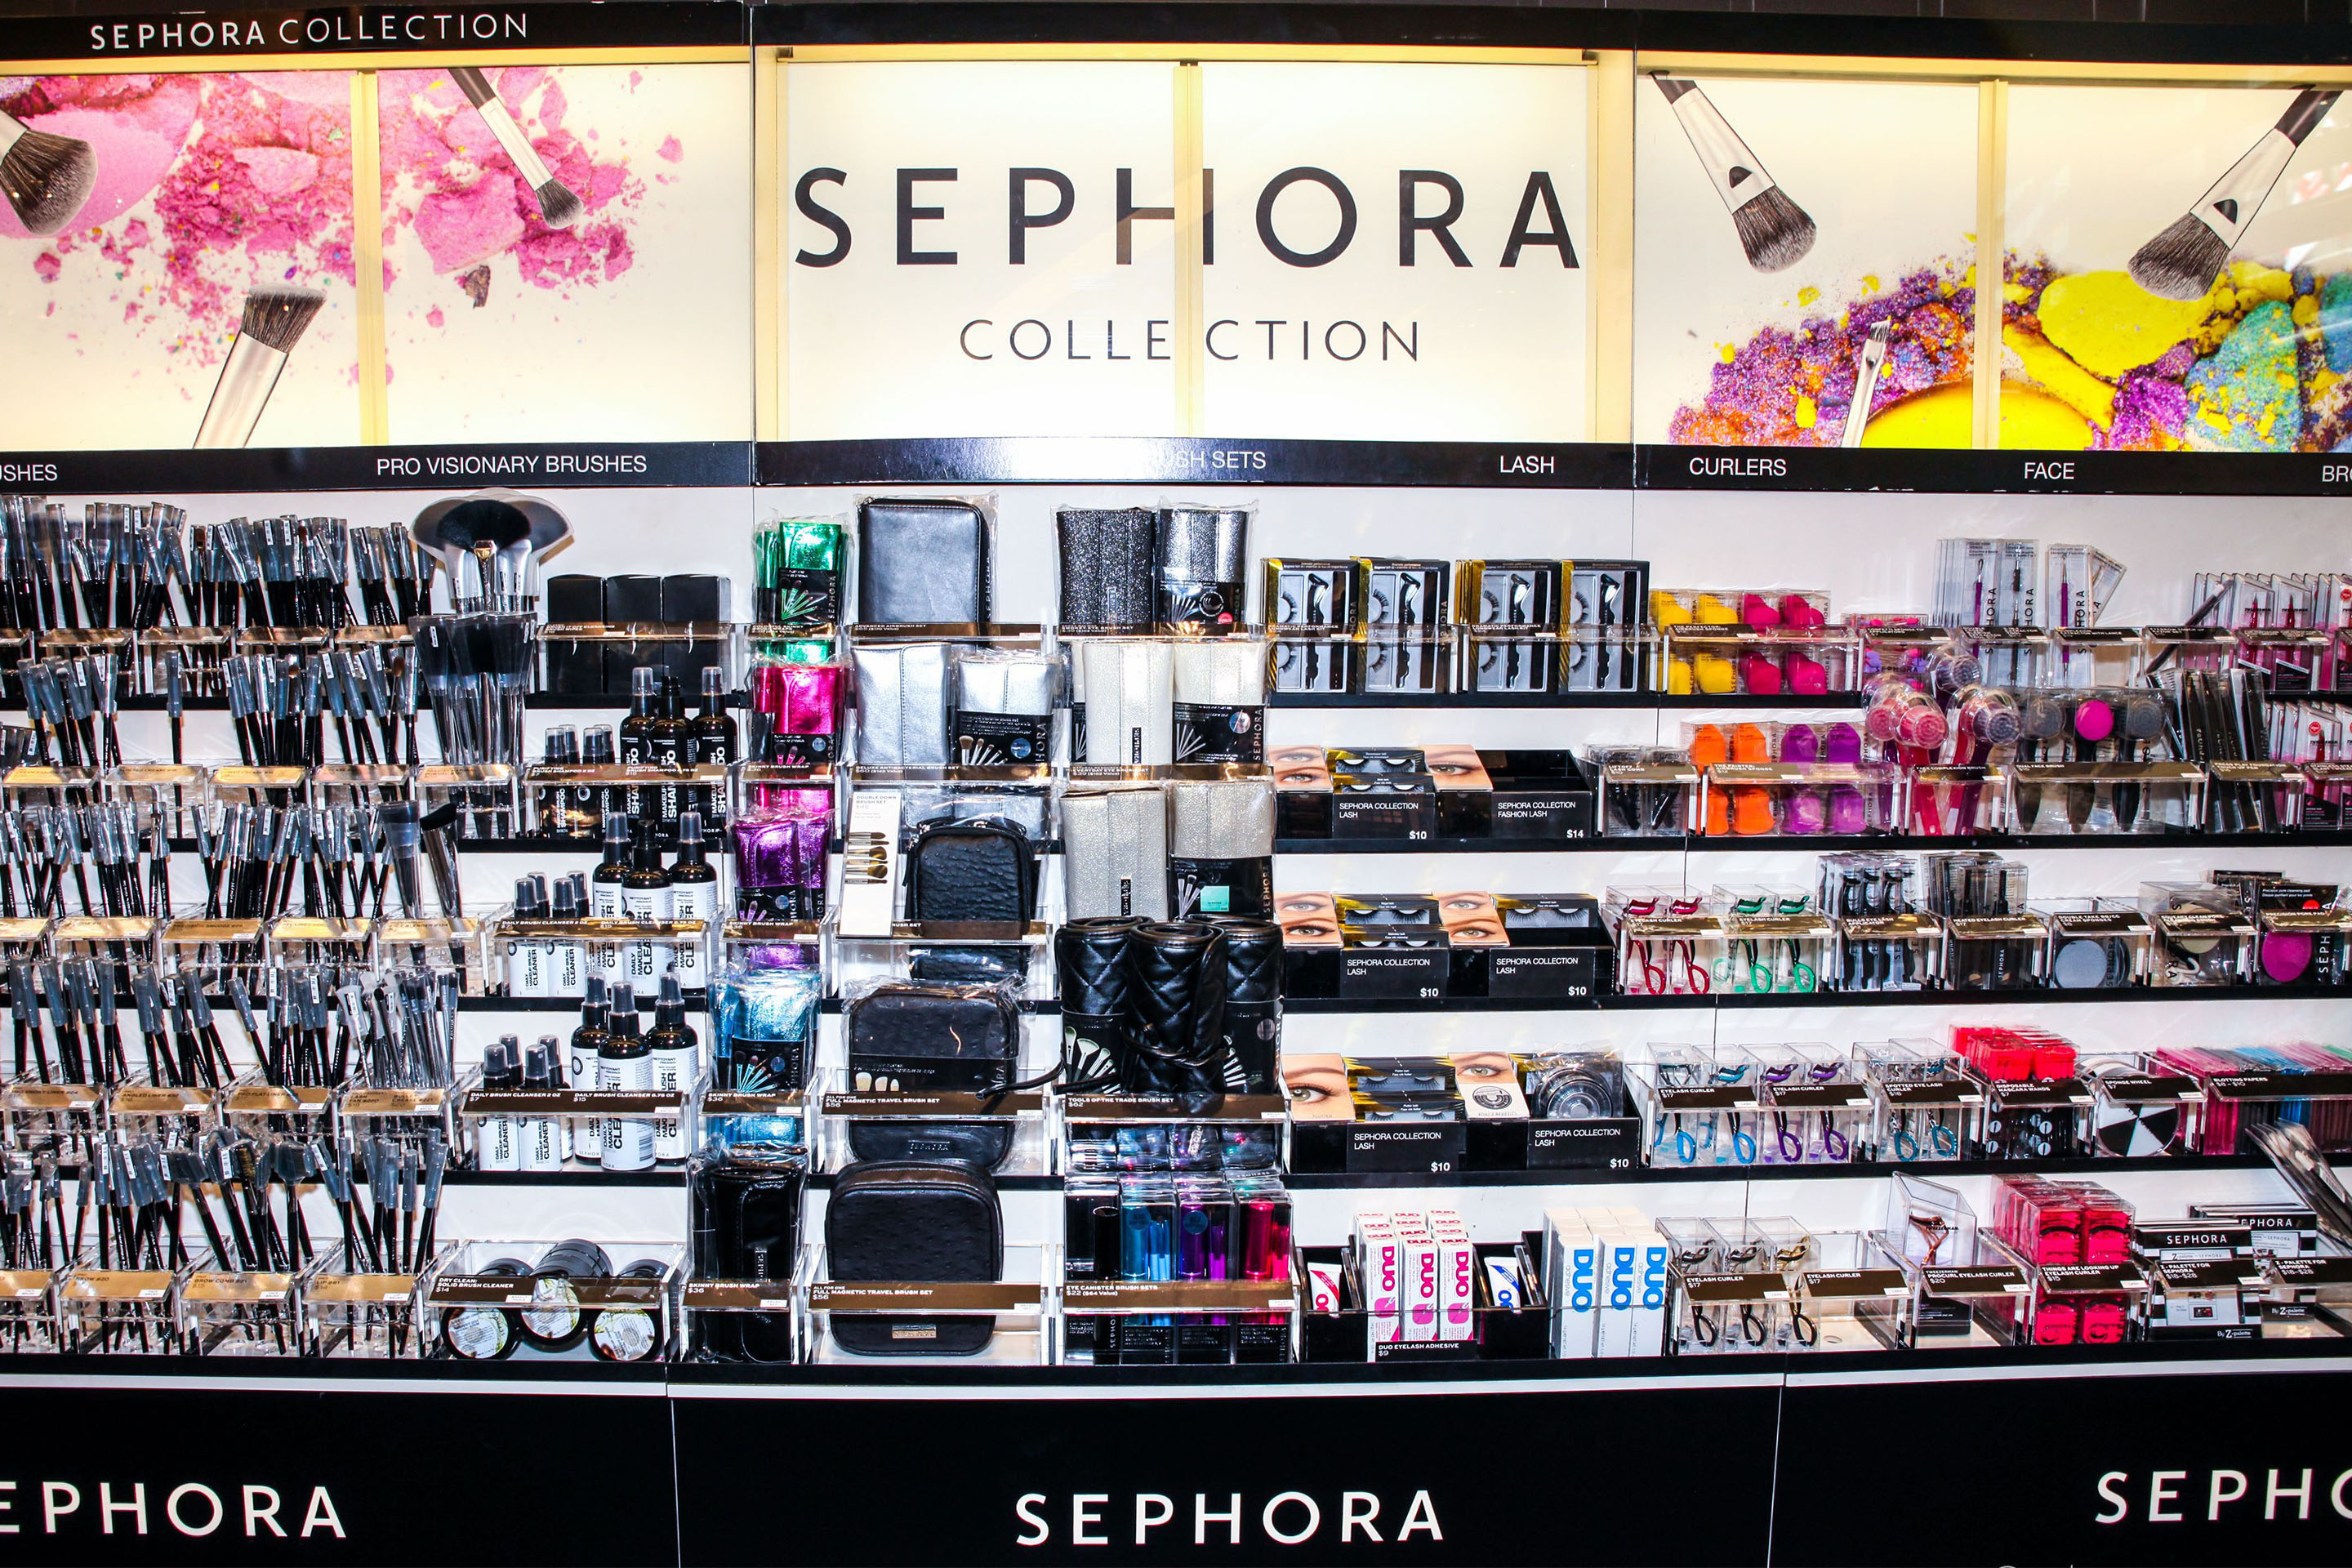 4 Things You Should NEVER Buy at Sephora, According to Ex-Employees